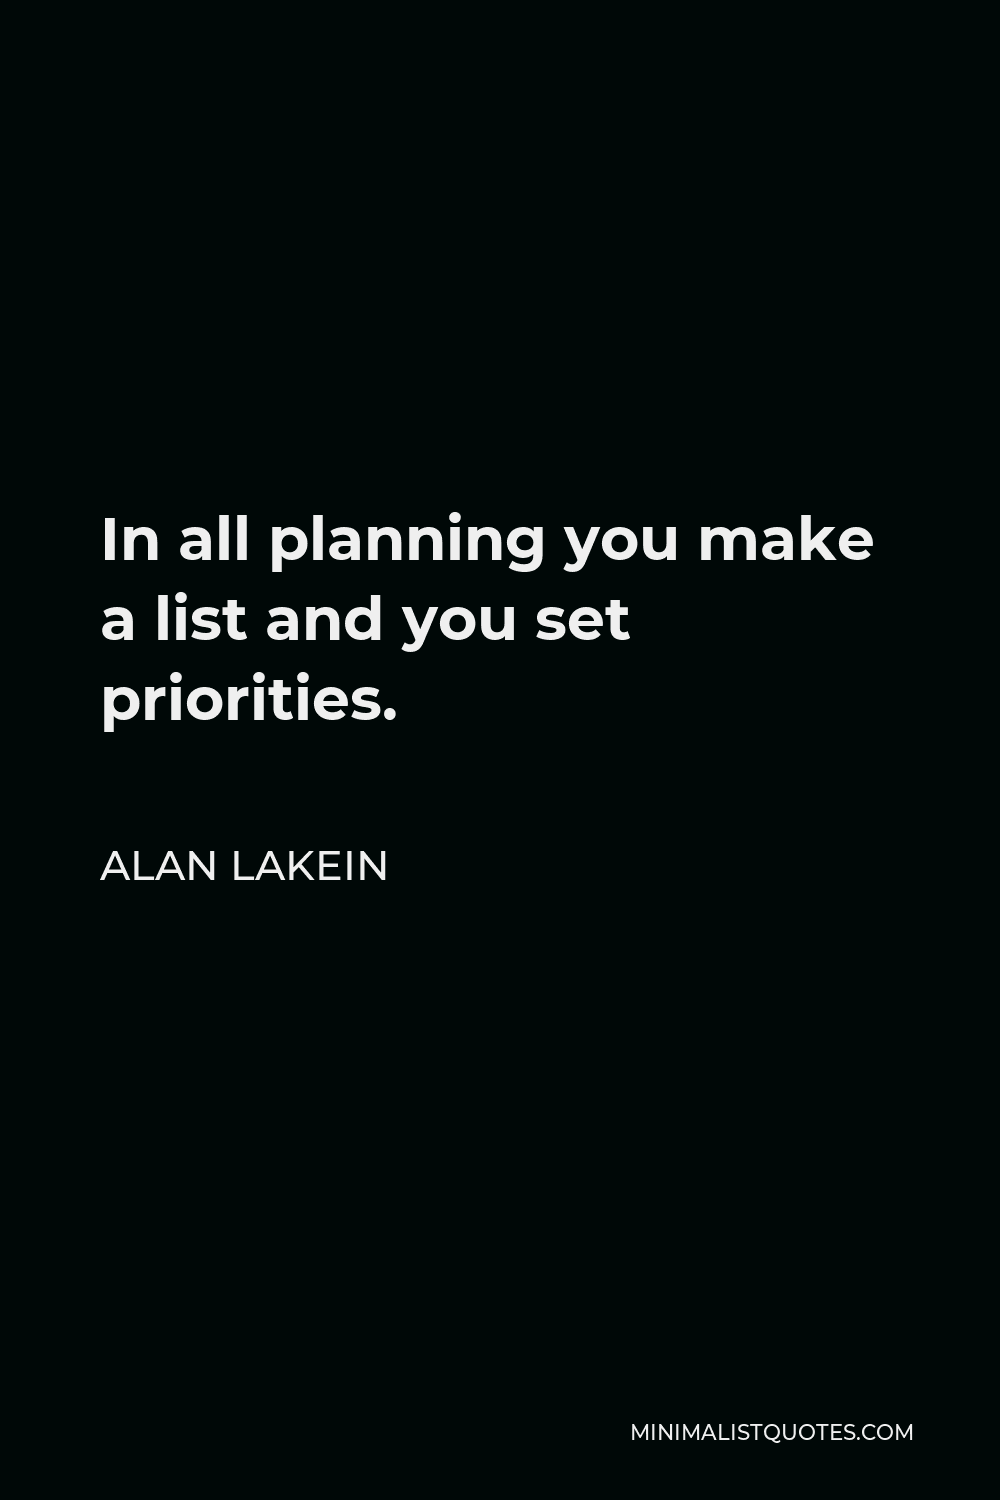 Alan Lakein Quote - In all planning you make a list and you set priorities.